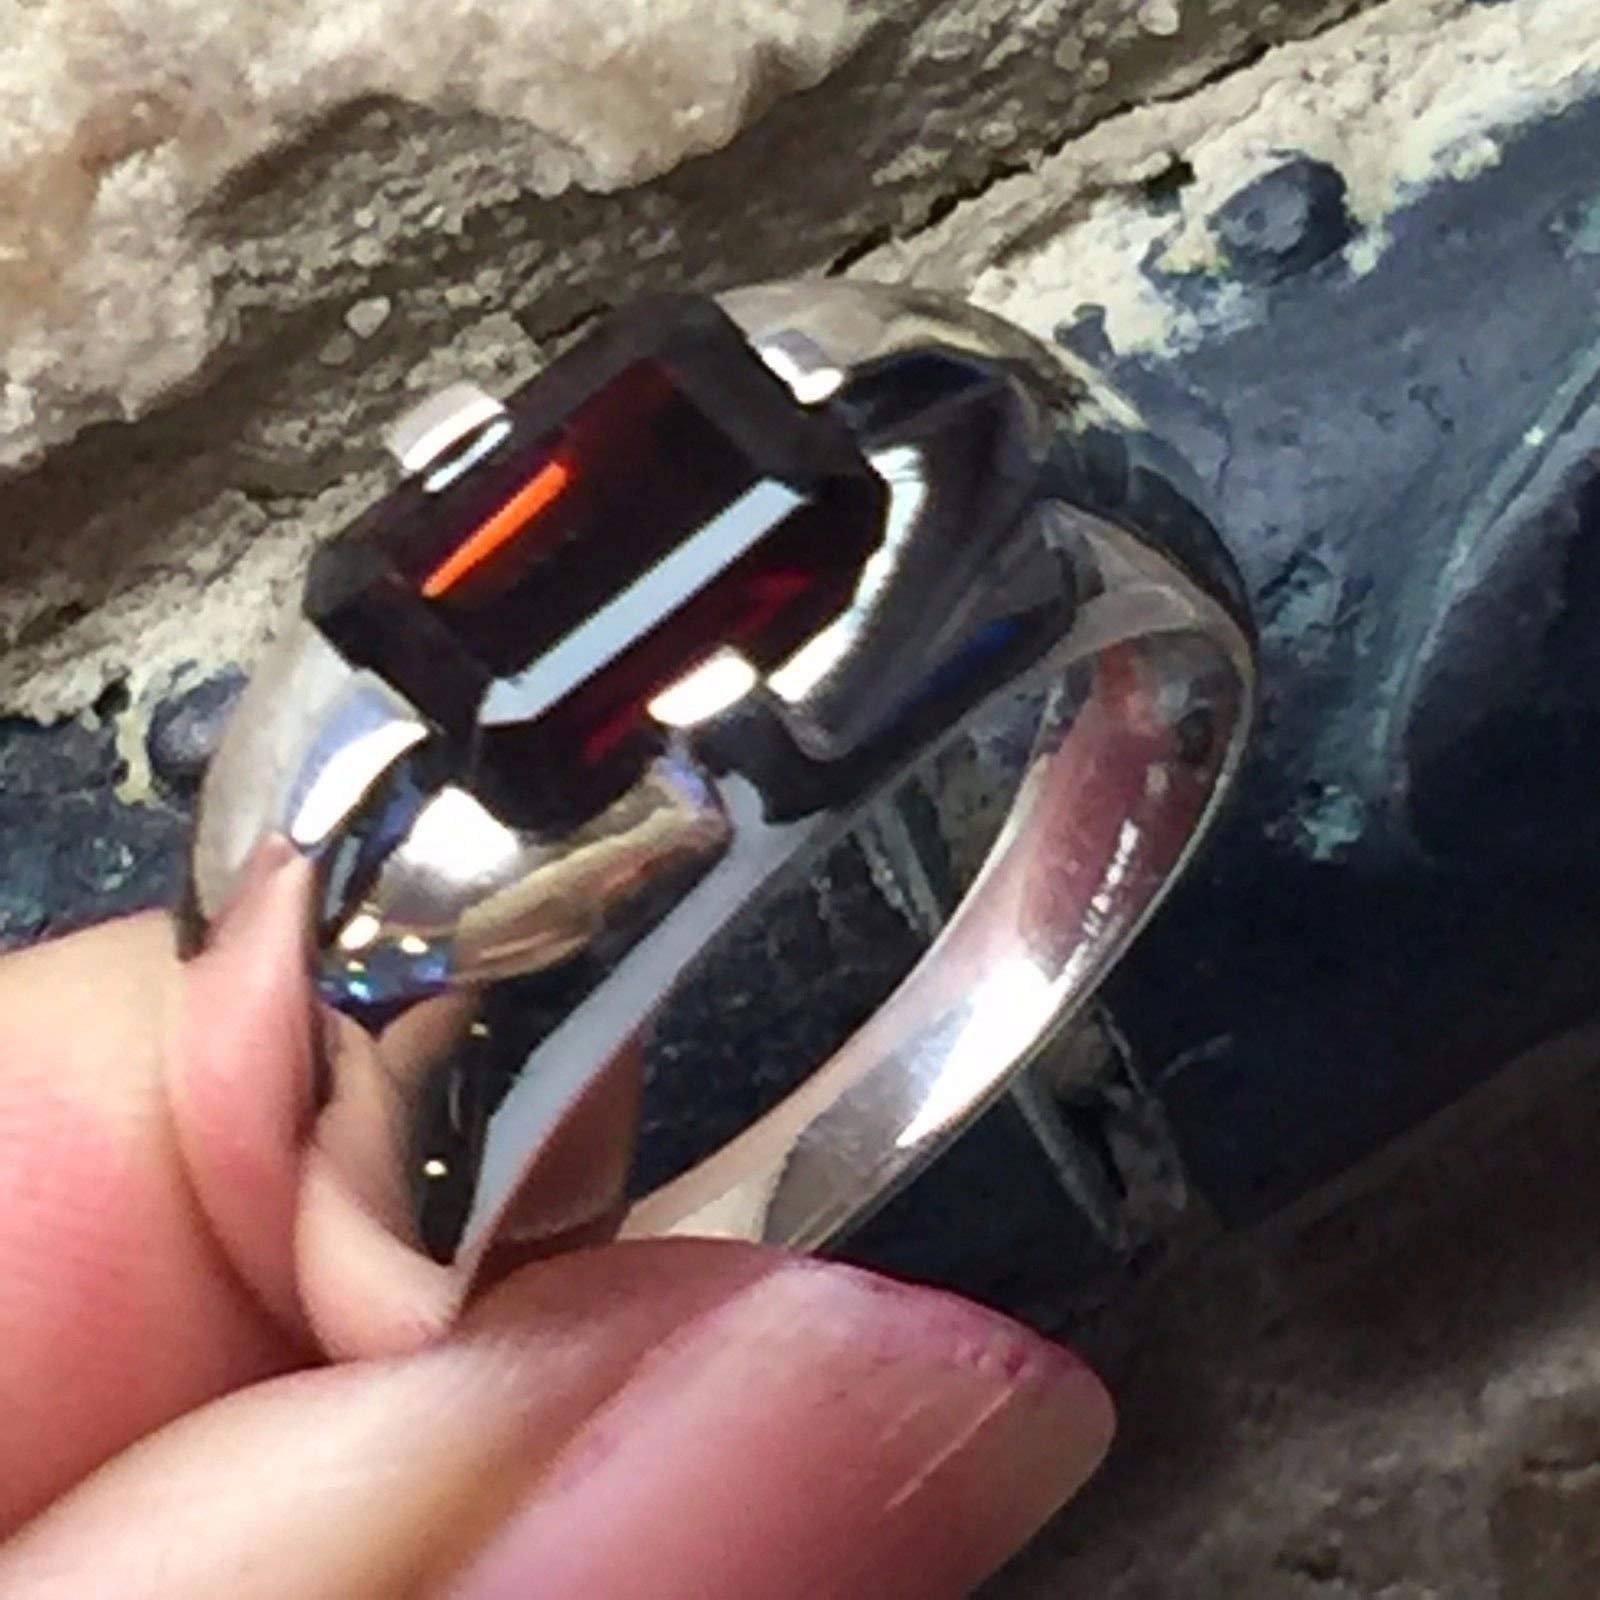 Natural 2ct Pyrope Garnet 925 Solid Sterling Silver Unisex Ring Size 6, 7, 8, 9 - Natural Rocks by Kala